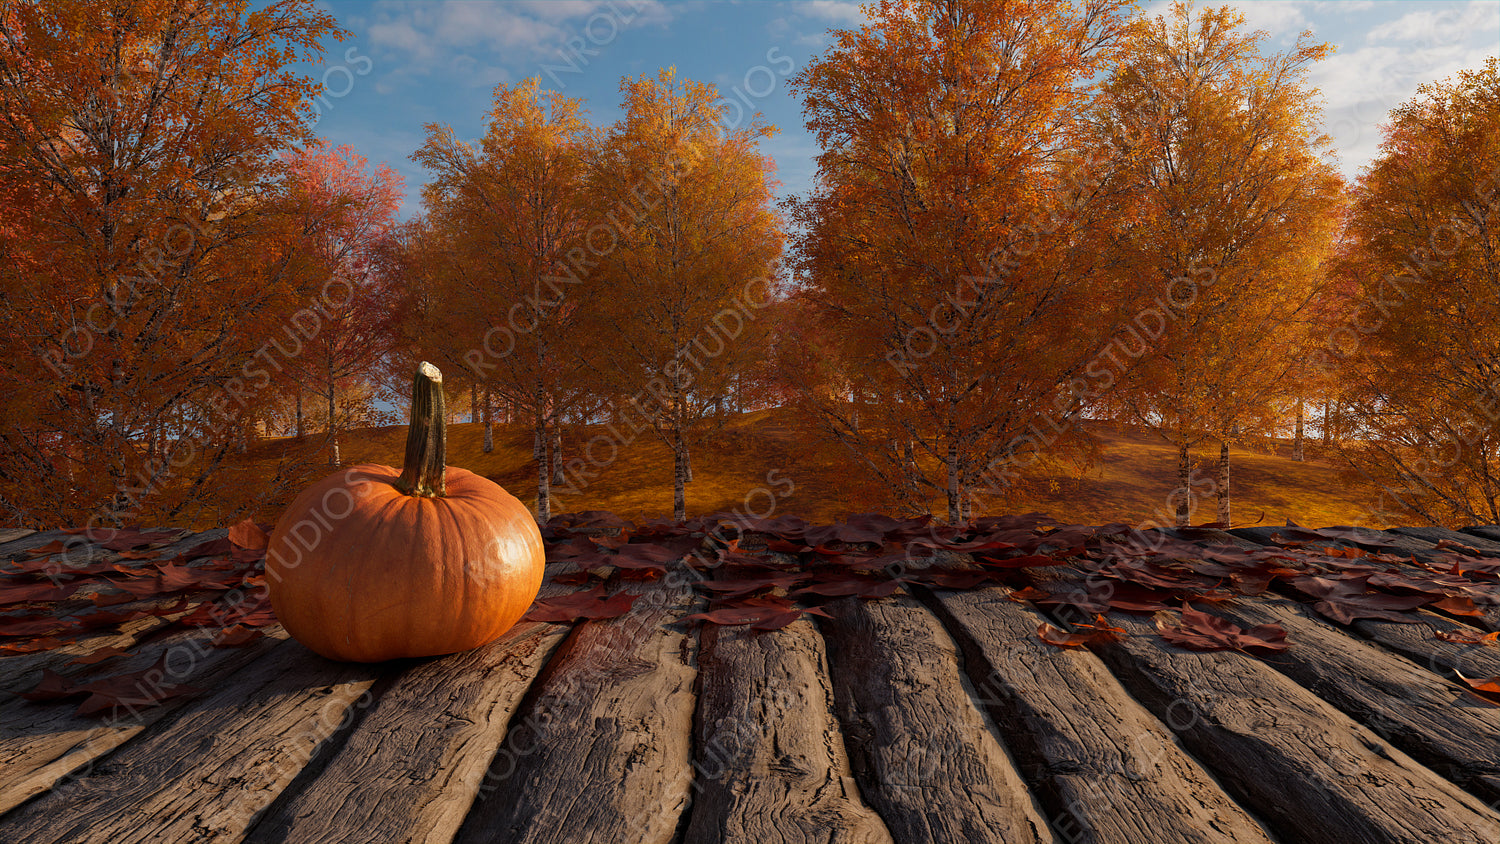 Thanksgiving Wallpaper with Pumpkin and Autumn Leaves. Seasonal Natural Setting with copy-space.